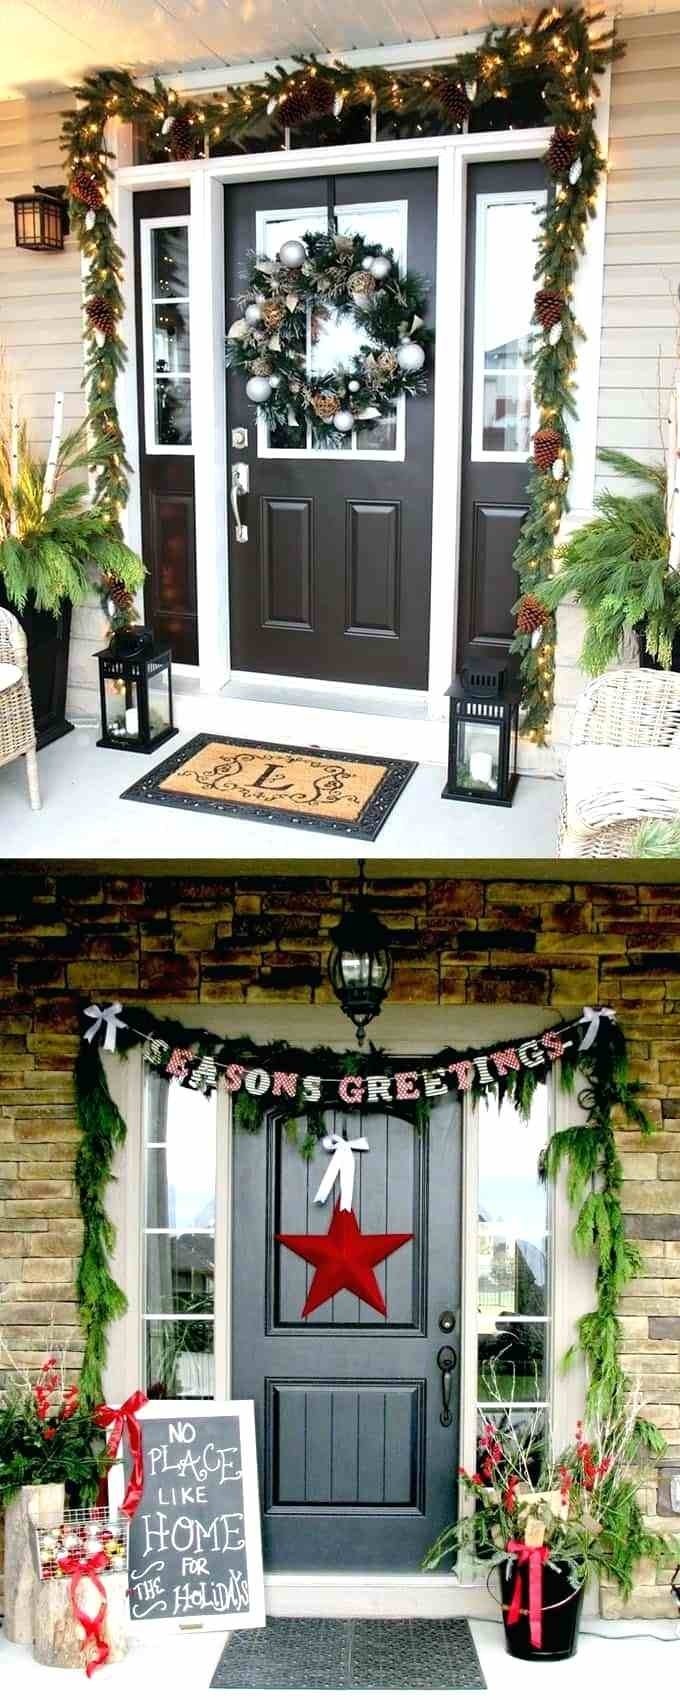 10 Ideal Easy Outdoor Christmas Decorating Ideas homemade outdoor christmas decorations musicyou co 2022